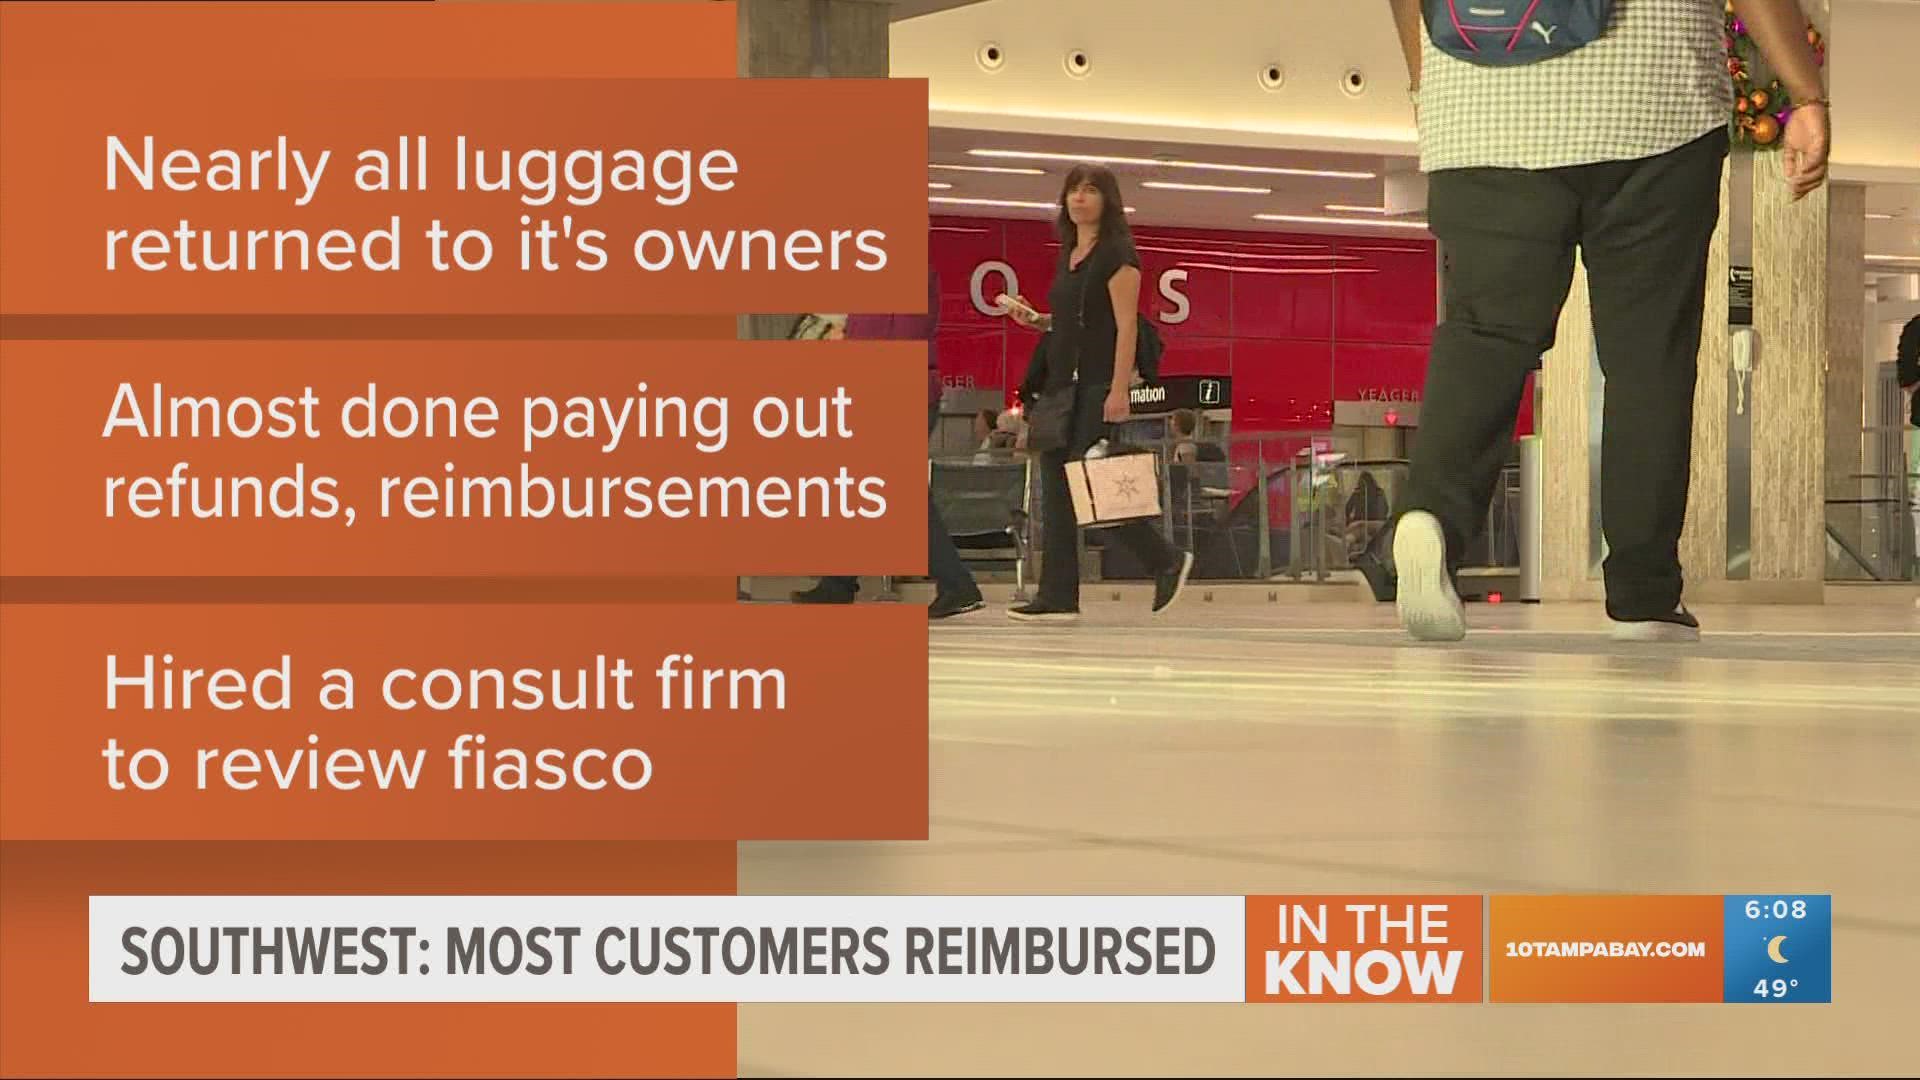 The airline says it has returned nearly all of the luggage that piled up across airports back to its owners.